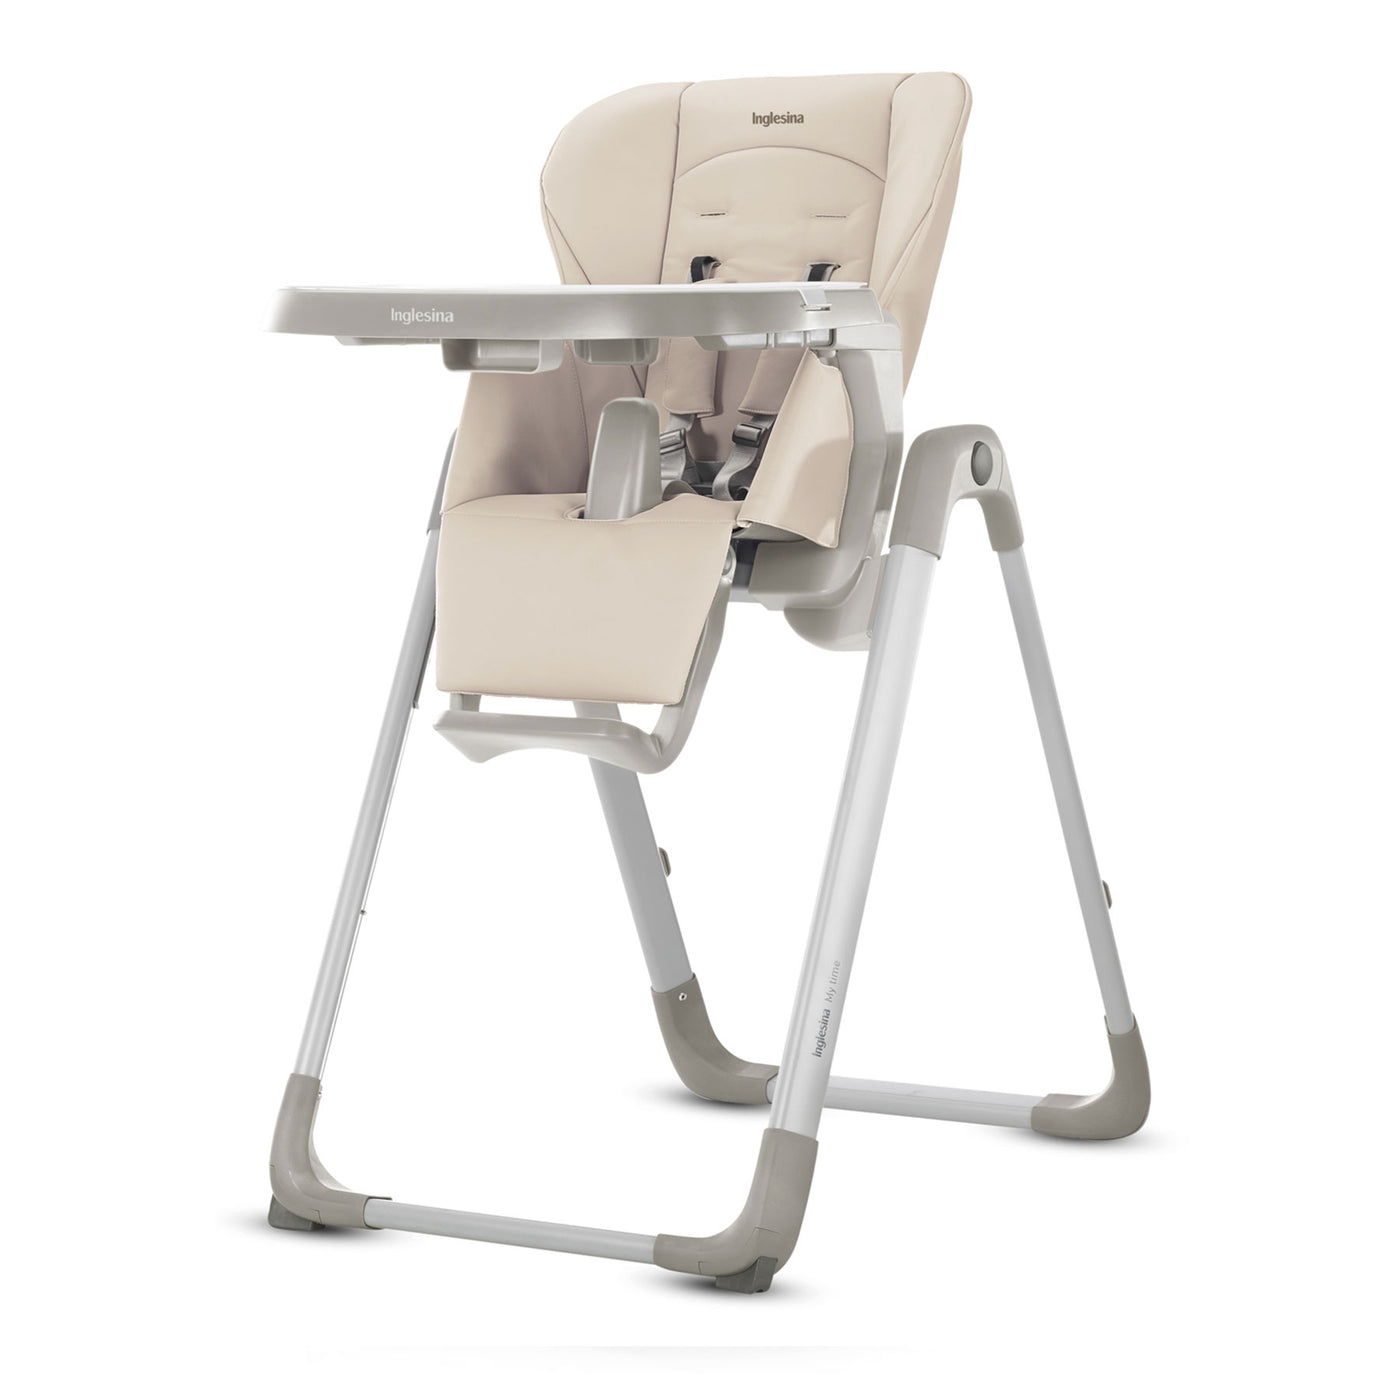 Inglesina My time folding highchair Butter color